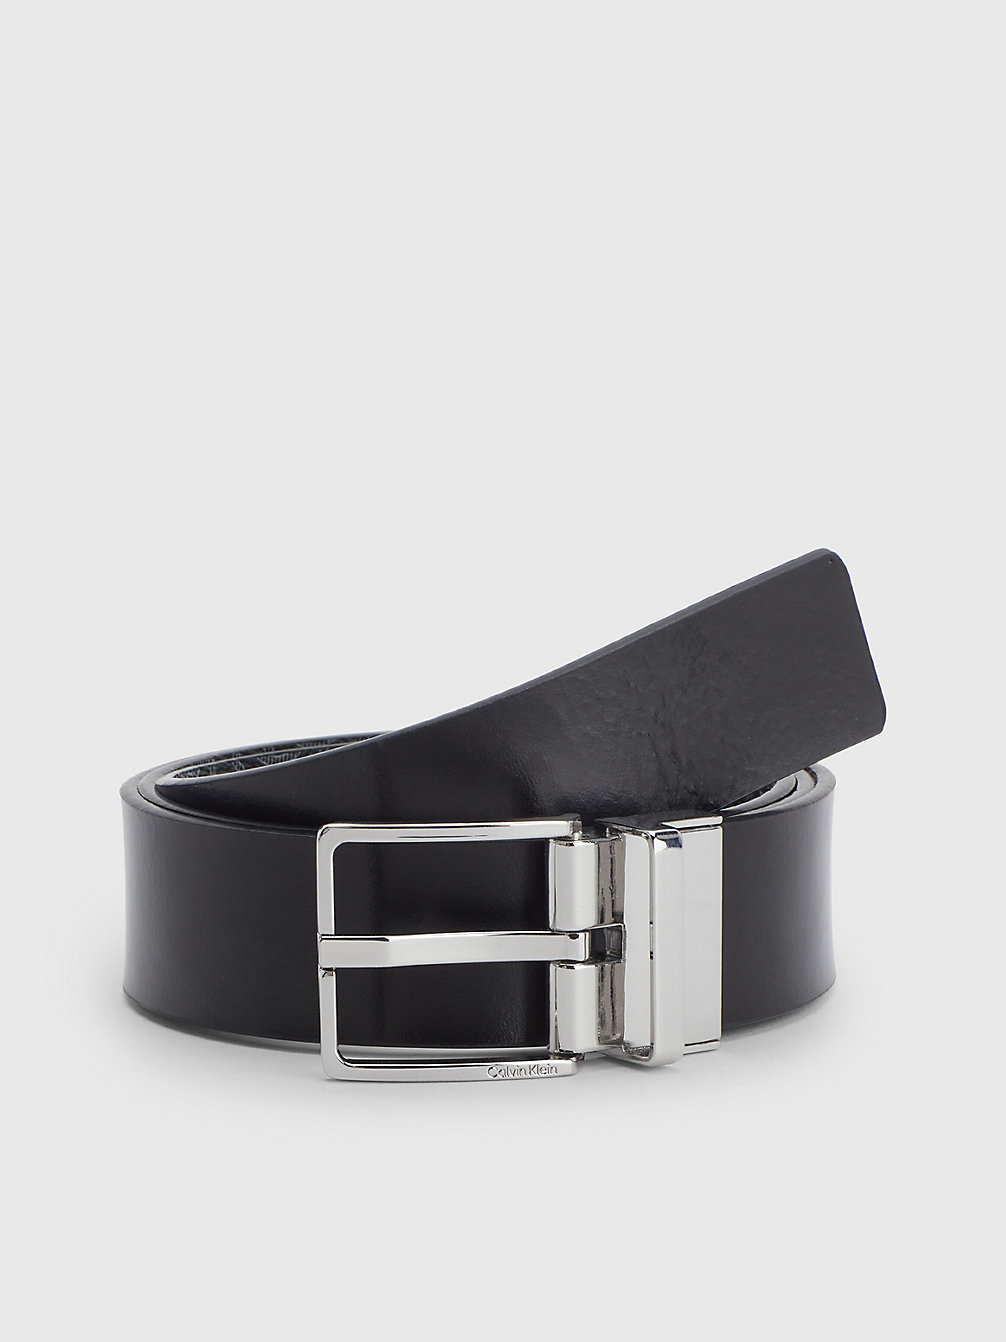 CK BLACK SMOOTH/CLASSIC MONO Reversible Recycled Logo Belt undefined men Calvin Klein